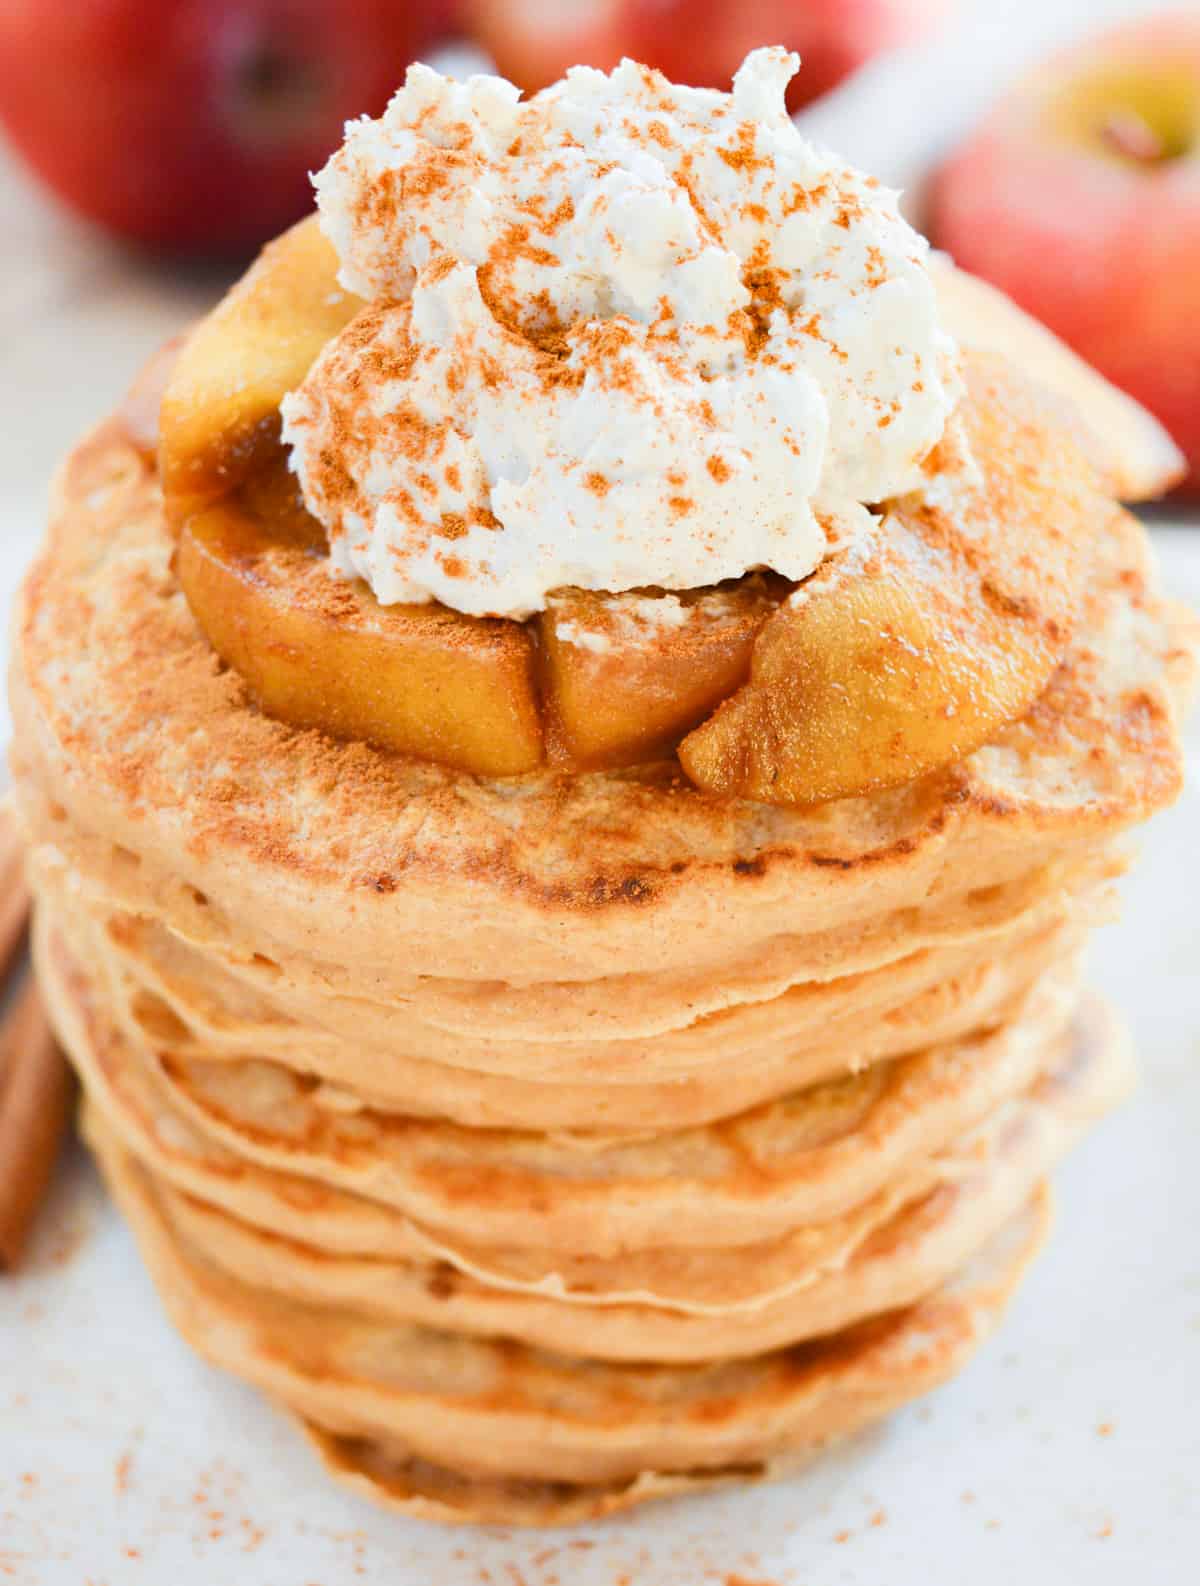 A large stack of vegan pancakes topped with cooked cinnamon apples and coconut whip.